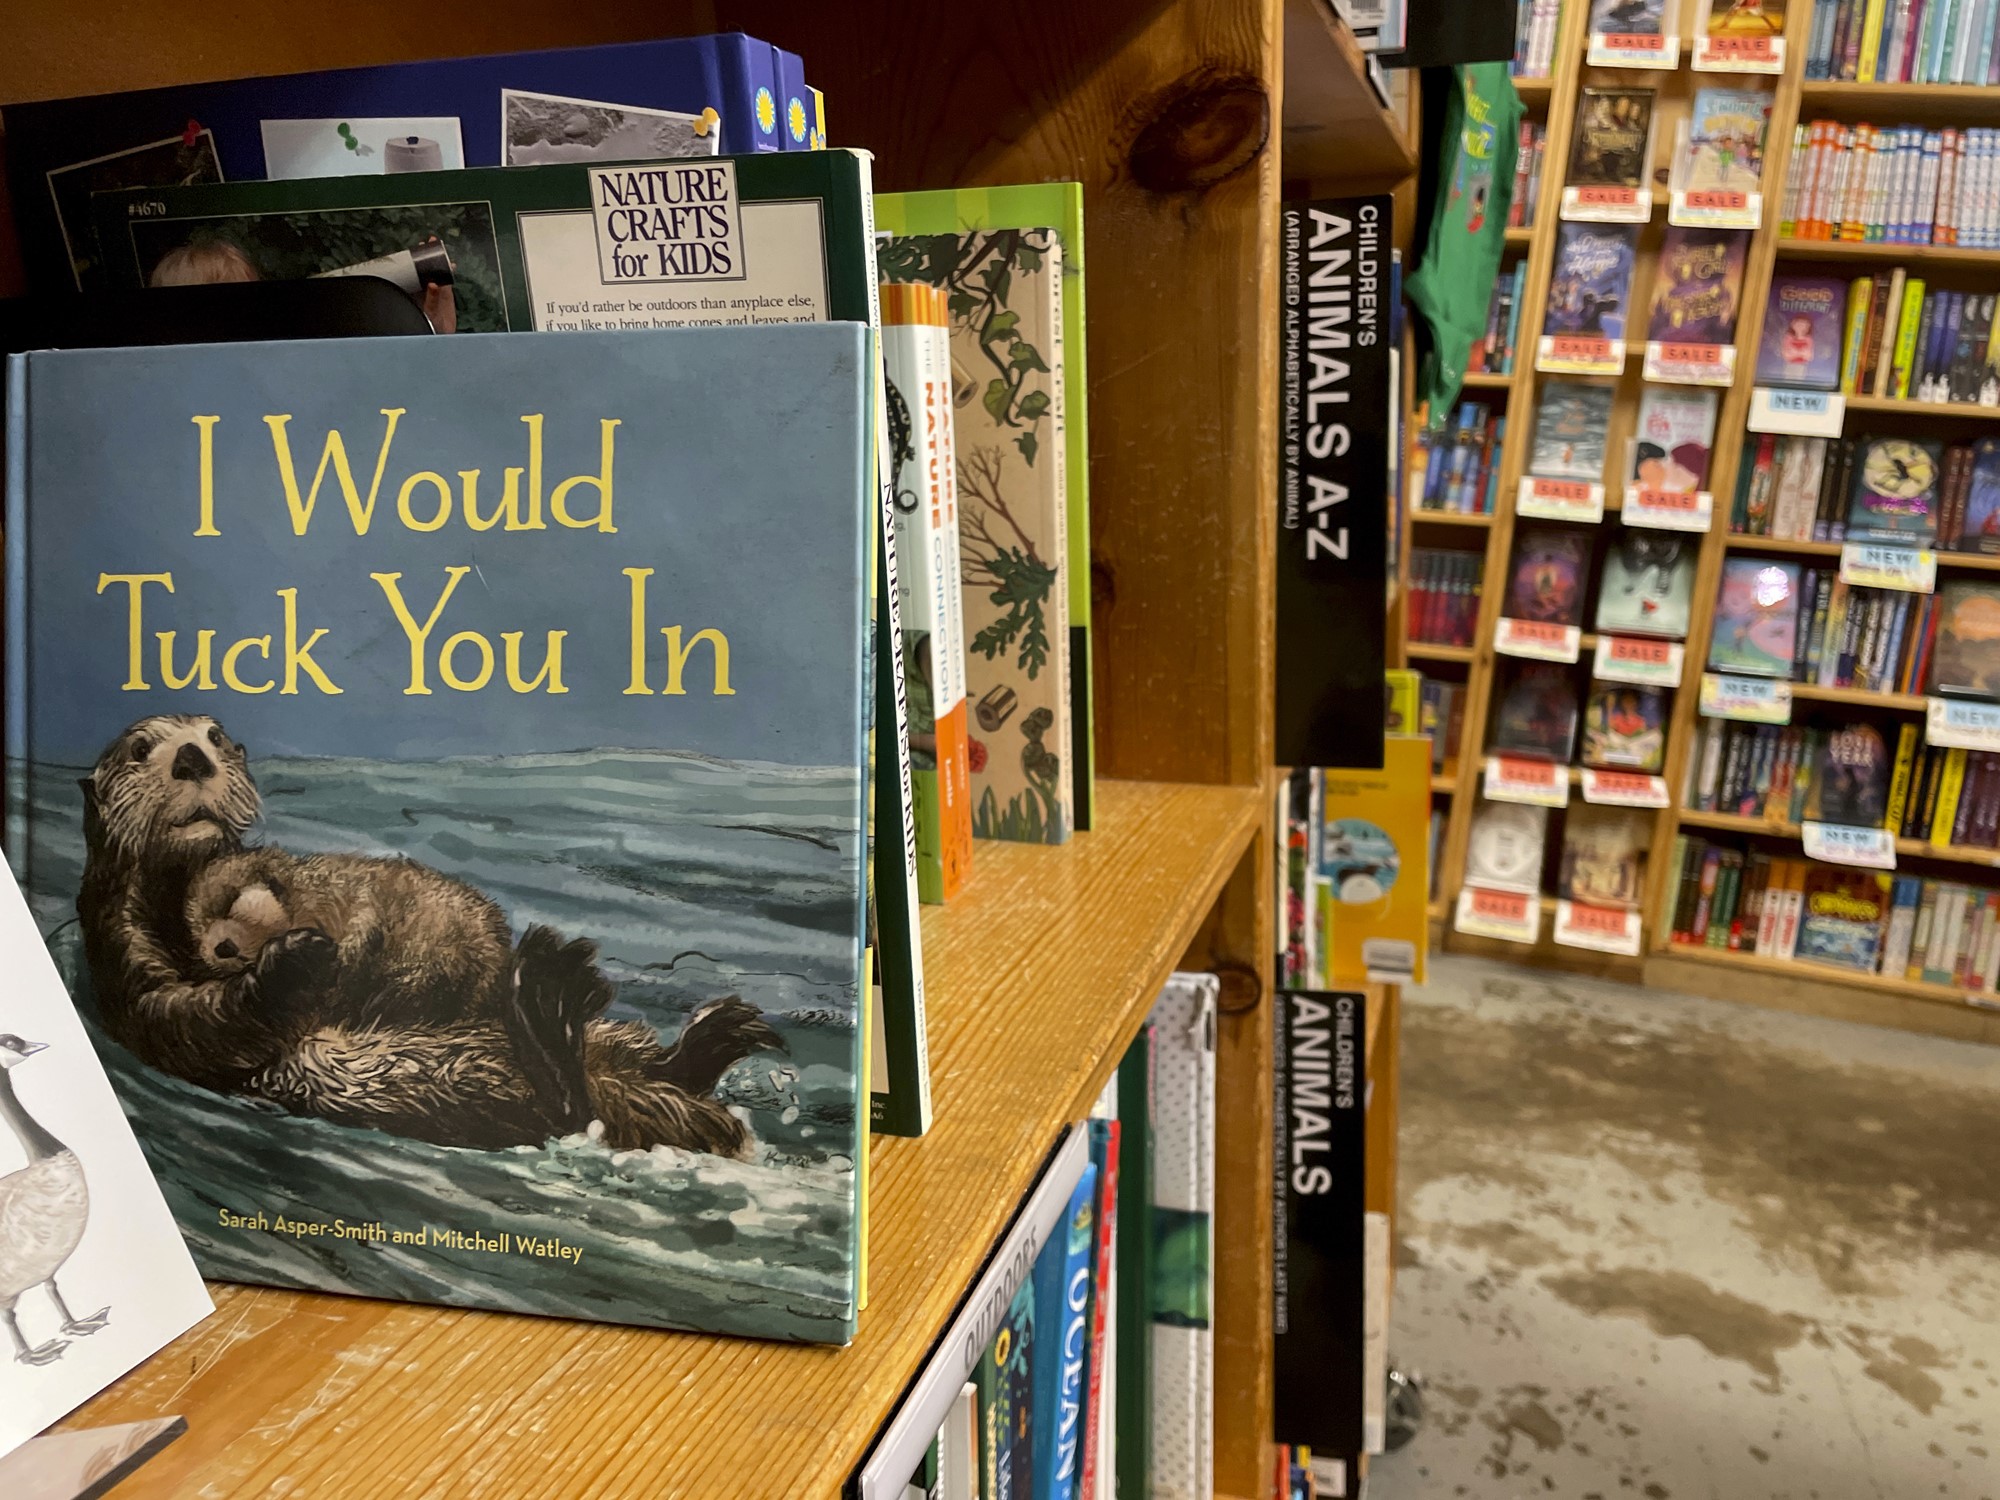 The children's book "I Would Tuck You In," illustrated by Mitchell Thomas Watley, is shown at a bookstore